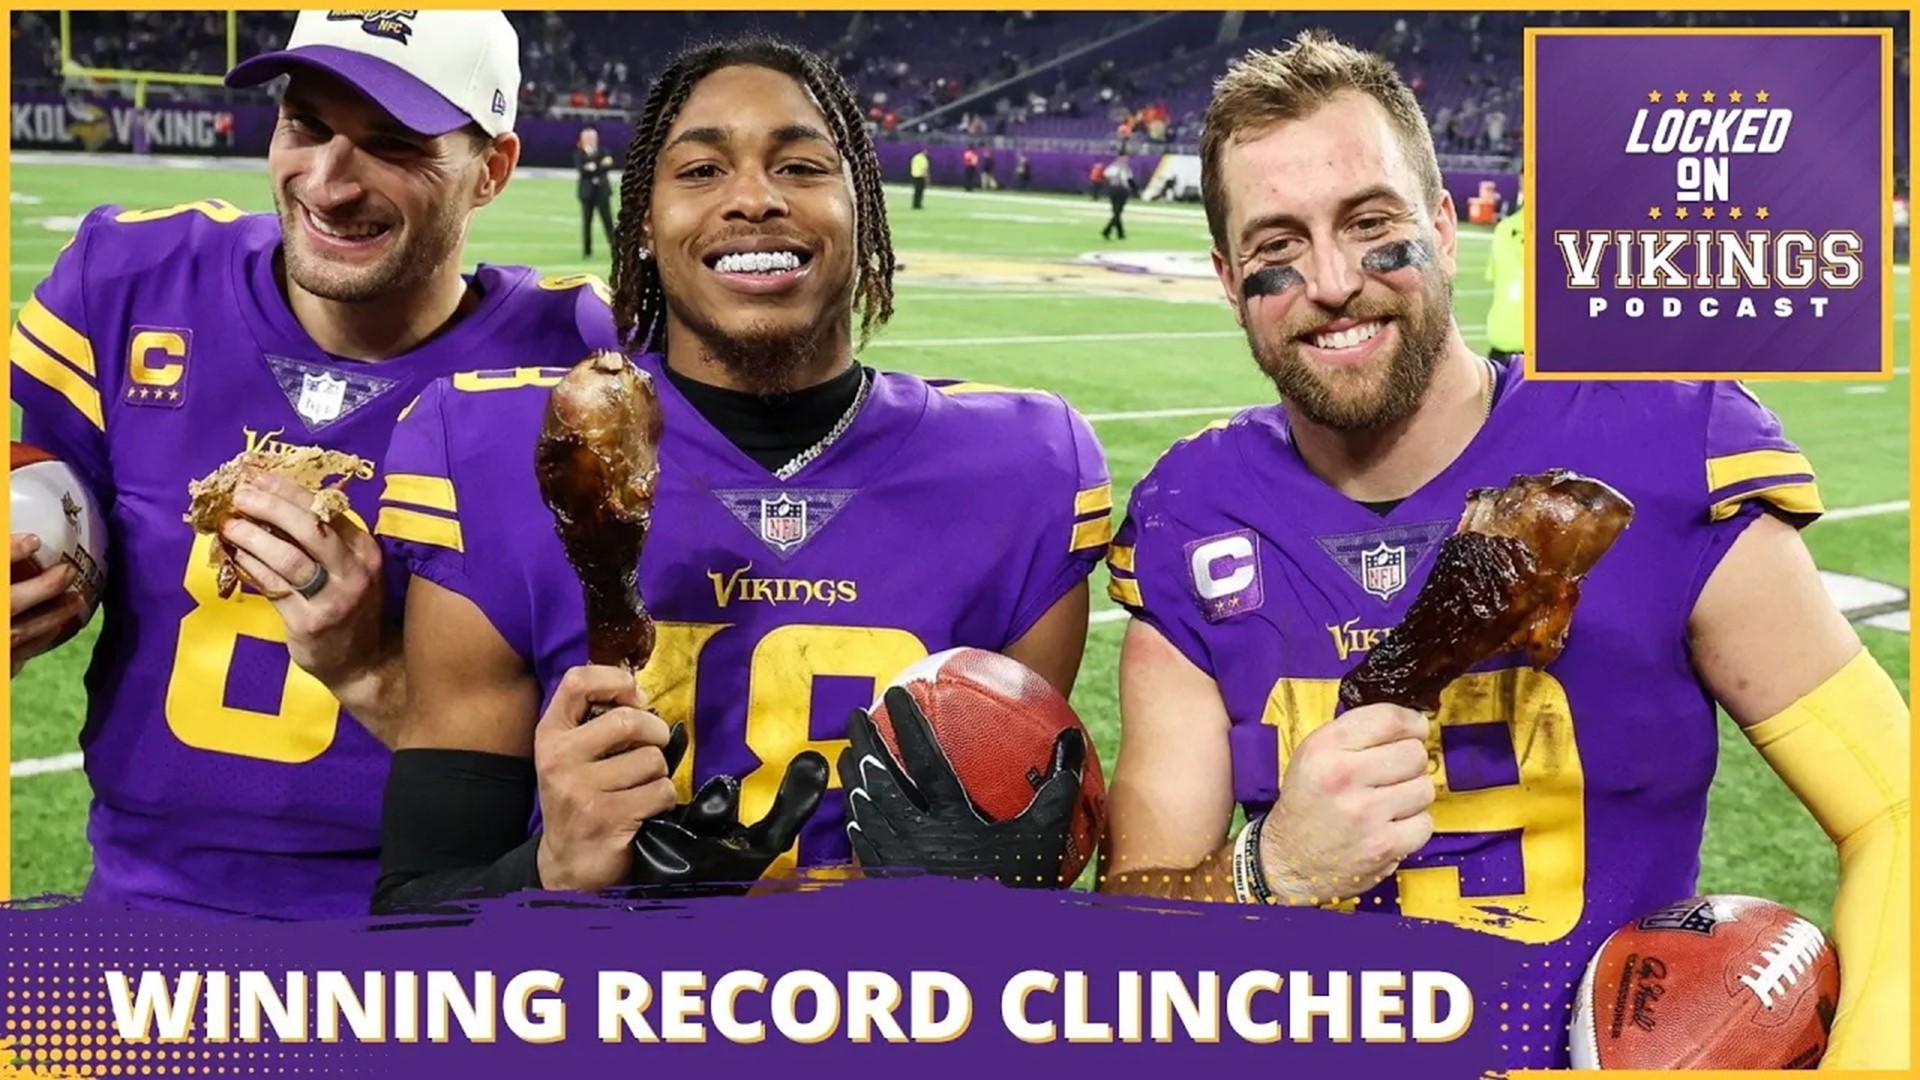 The Minnesota Vikings won their ninth game of the season, which means they will have a winning record for the first time since 2019.